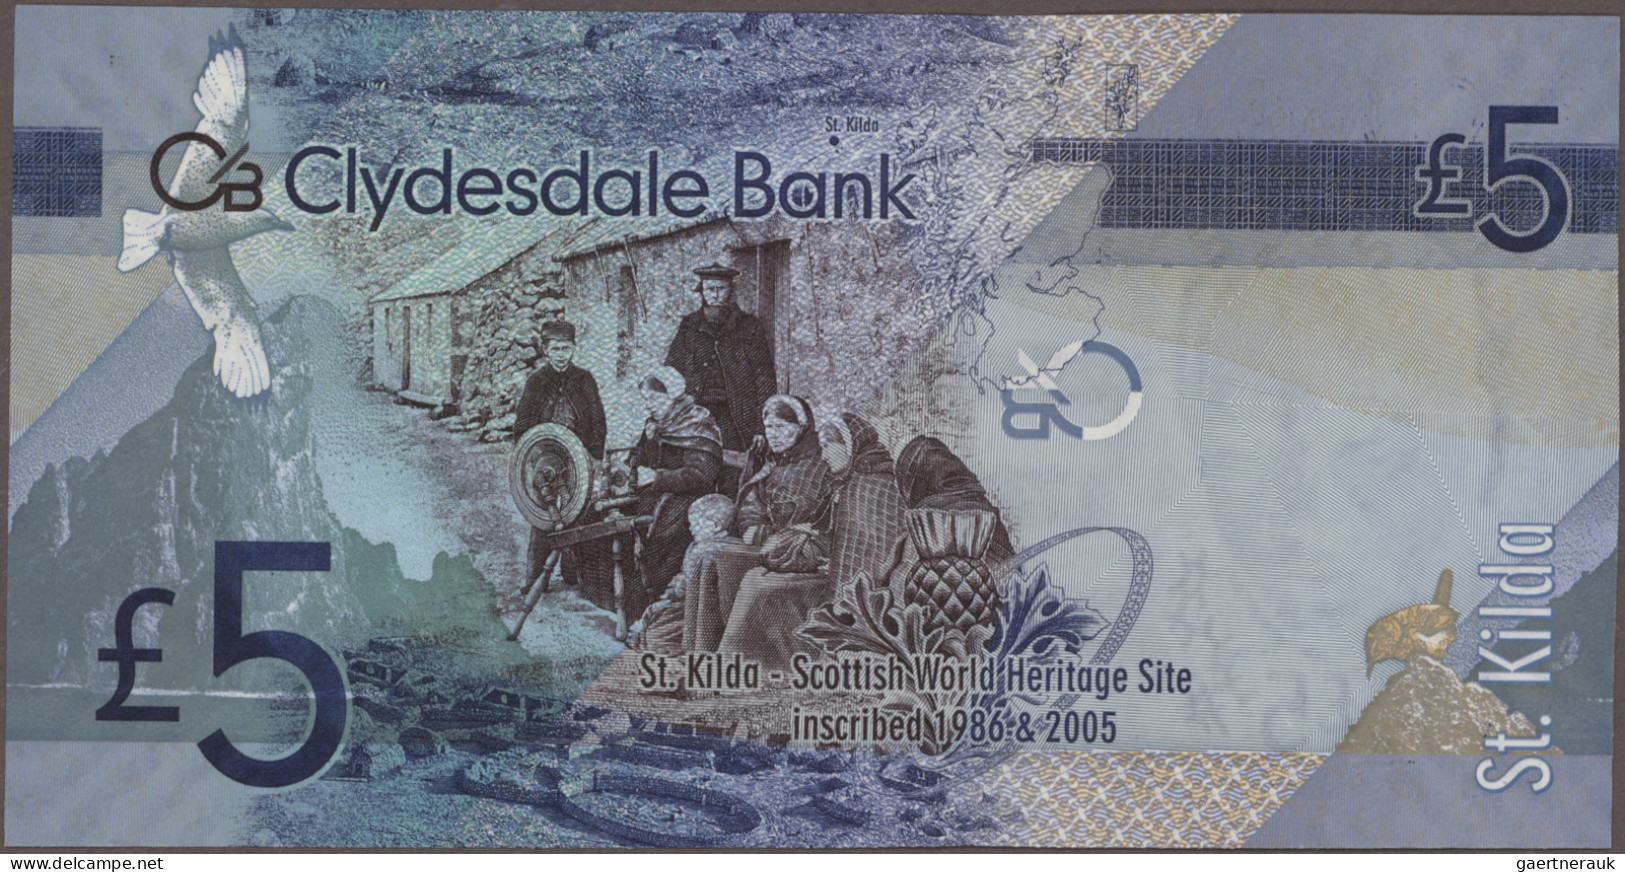 Scotland: Clydesdale Bank, lot with 4 banknotes, series 2009-2015, with 20 Pound